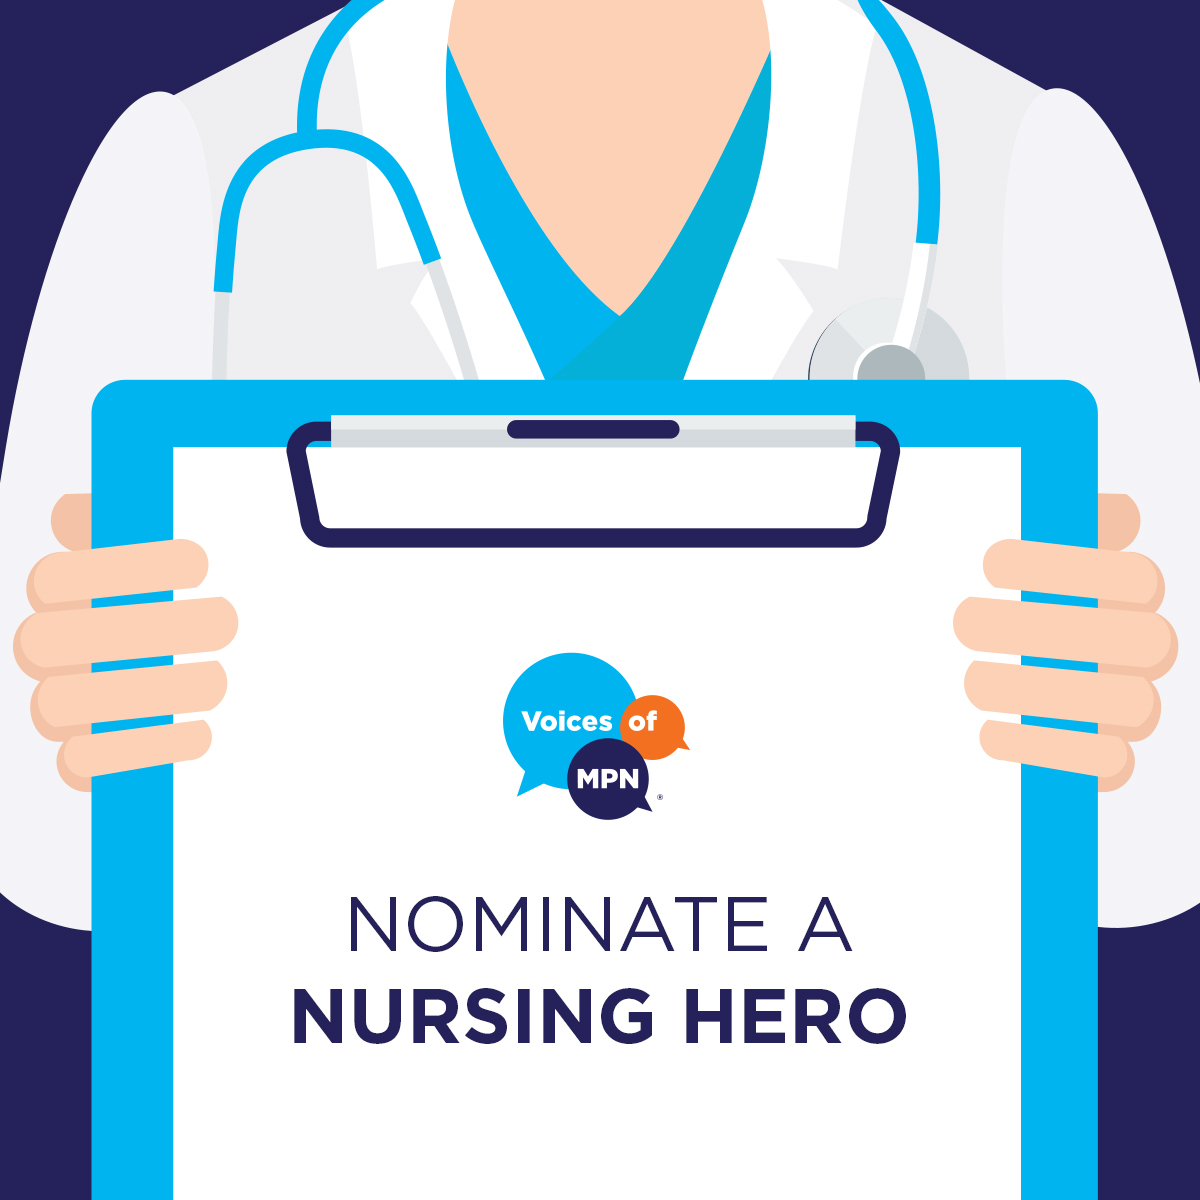 Know of a nurse supporting the Myeloproliferative Neoplasm (MPN) Community? Nominate them for MPN Hero during #nursesweek. MPNHeroes.com